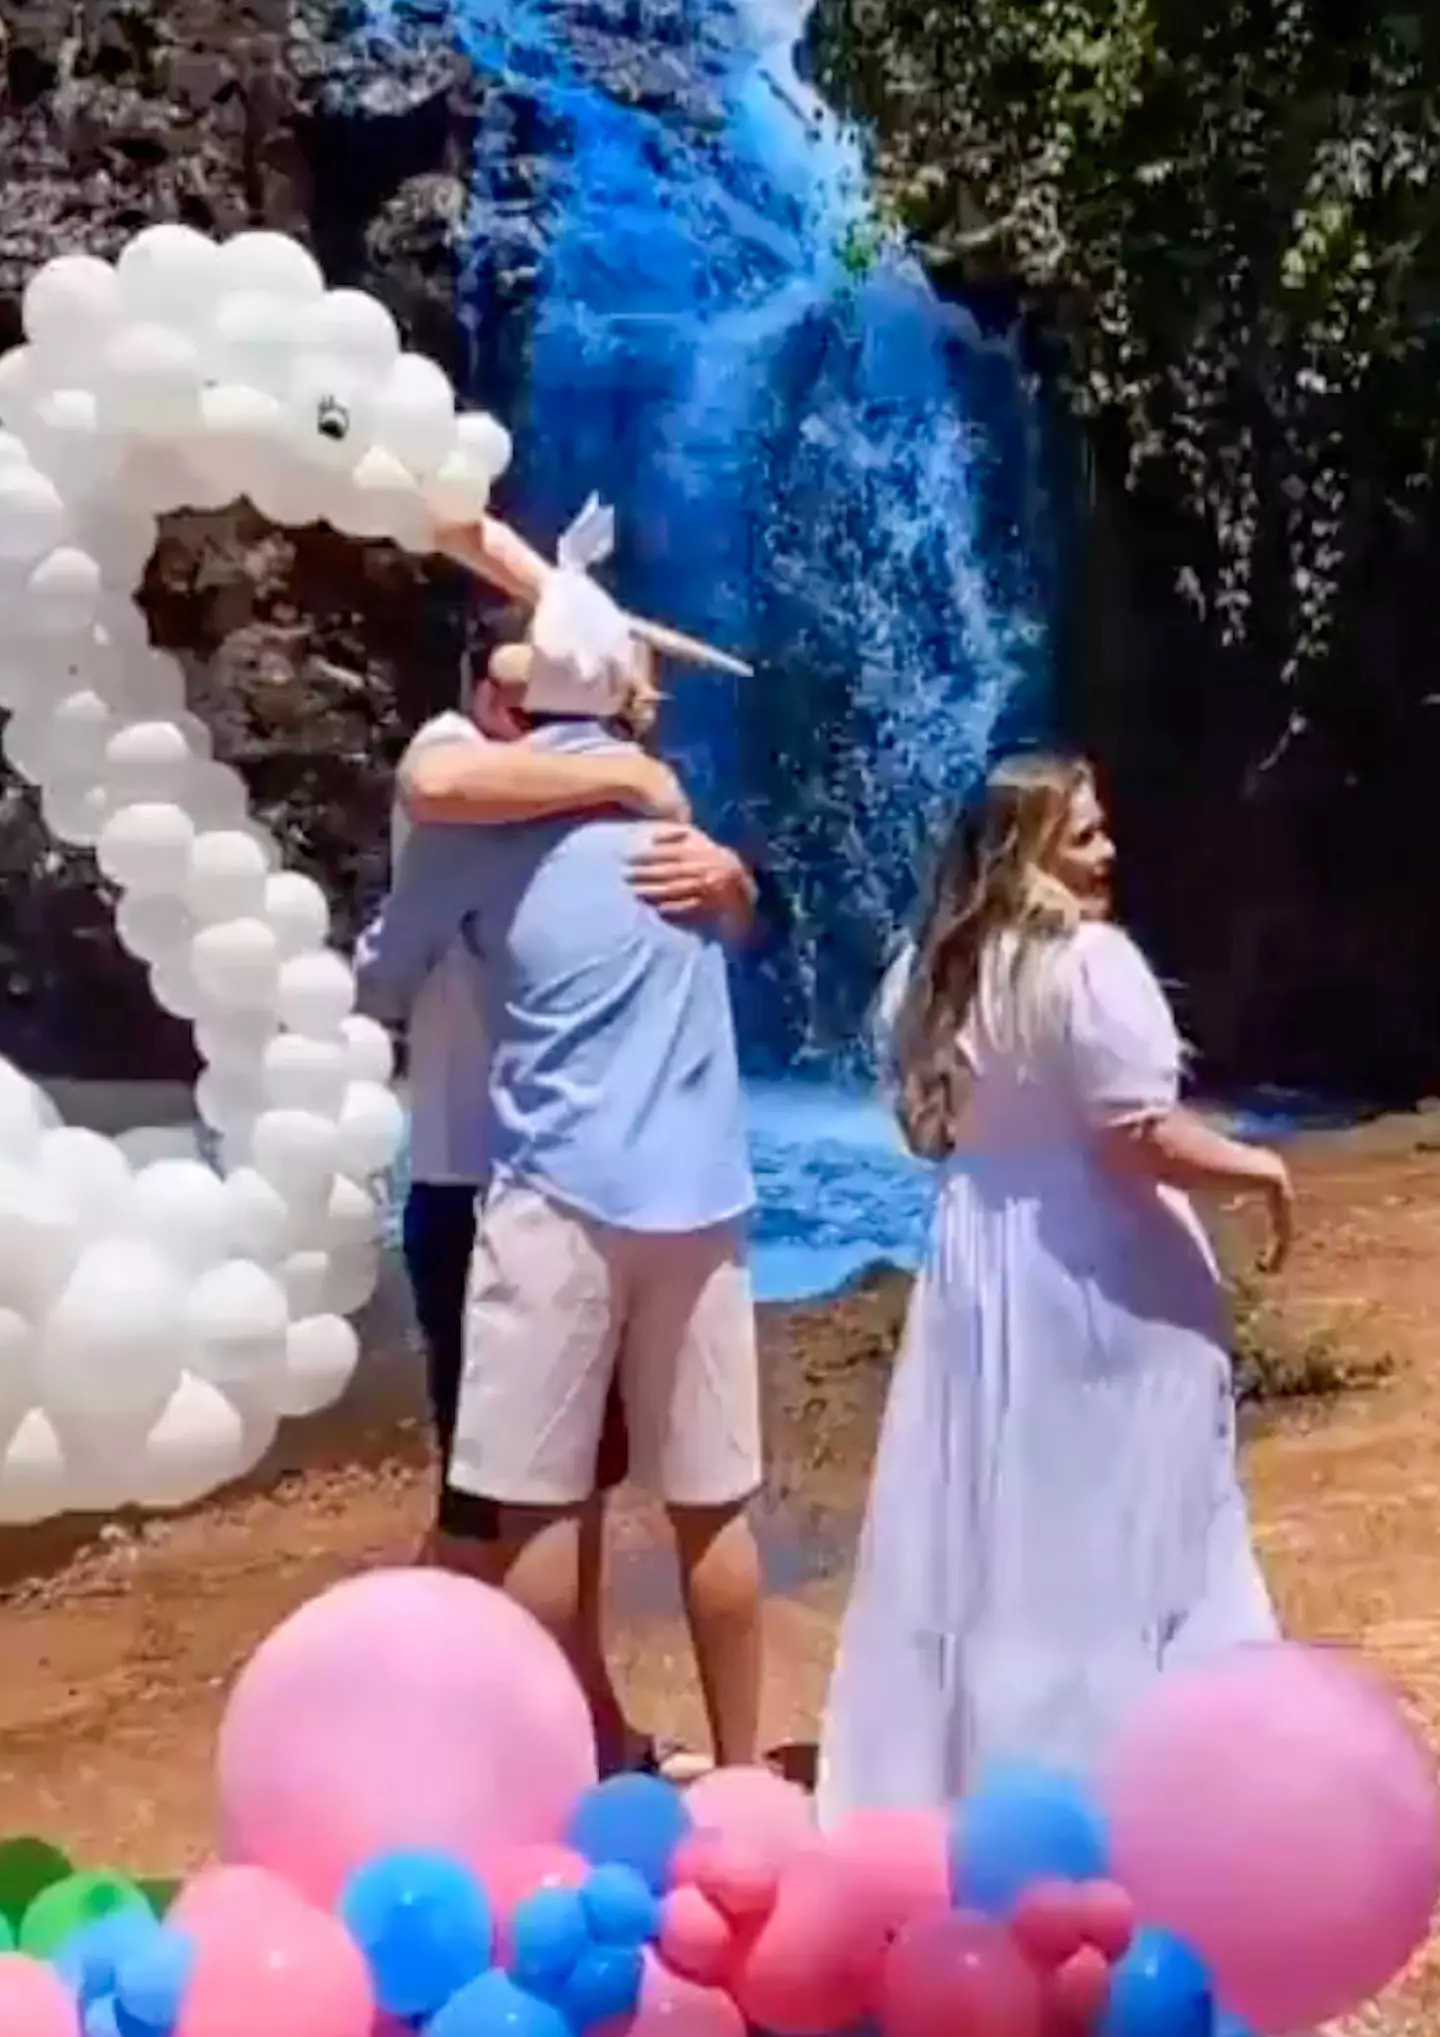 A couple have come under fire for dyeing a waterfall blue.